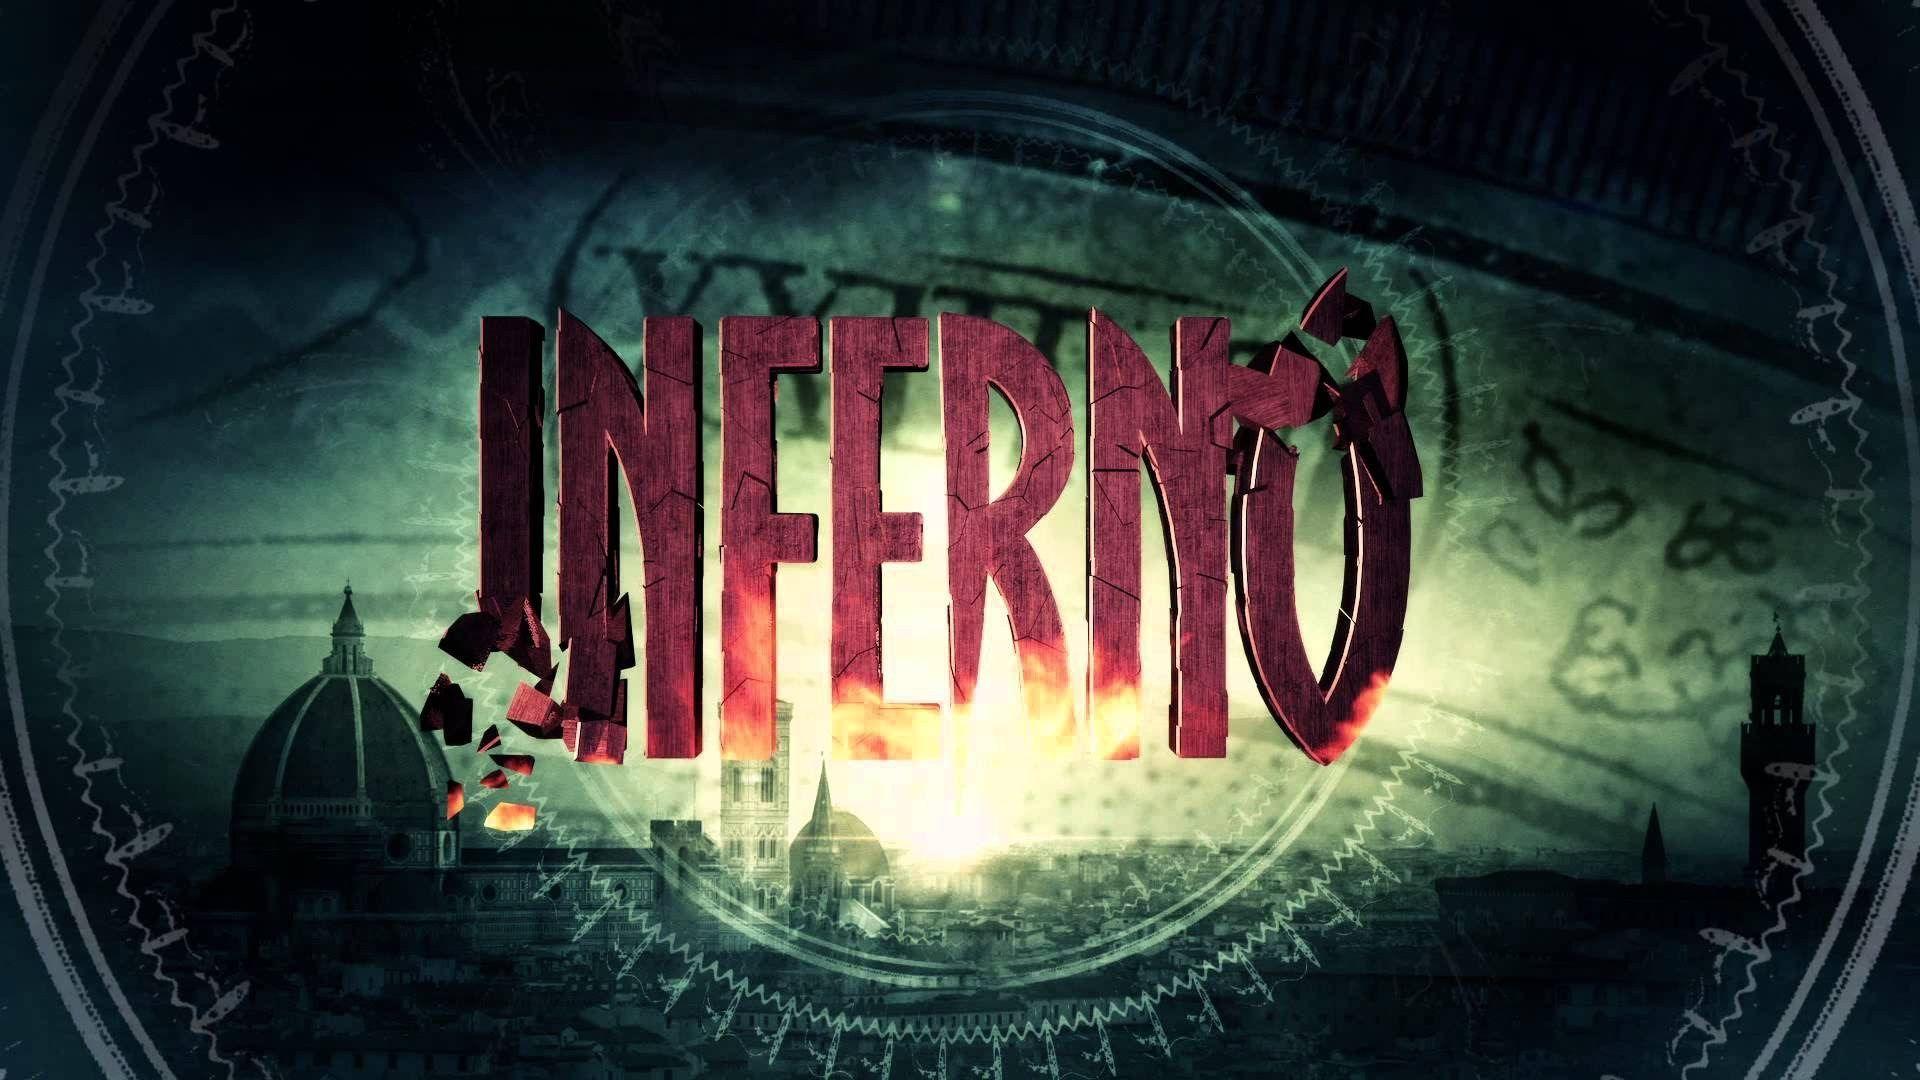 Inferno 2016 Wallpaper Image Photo Picture Background